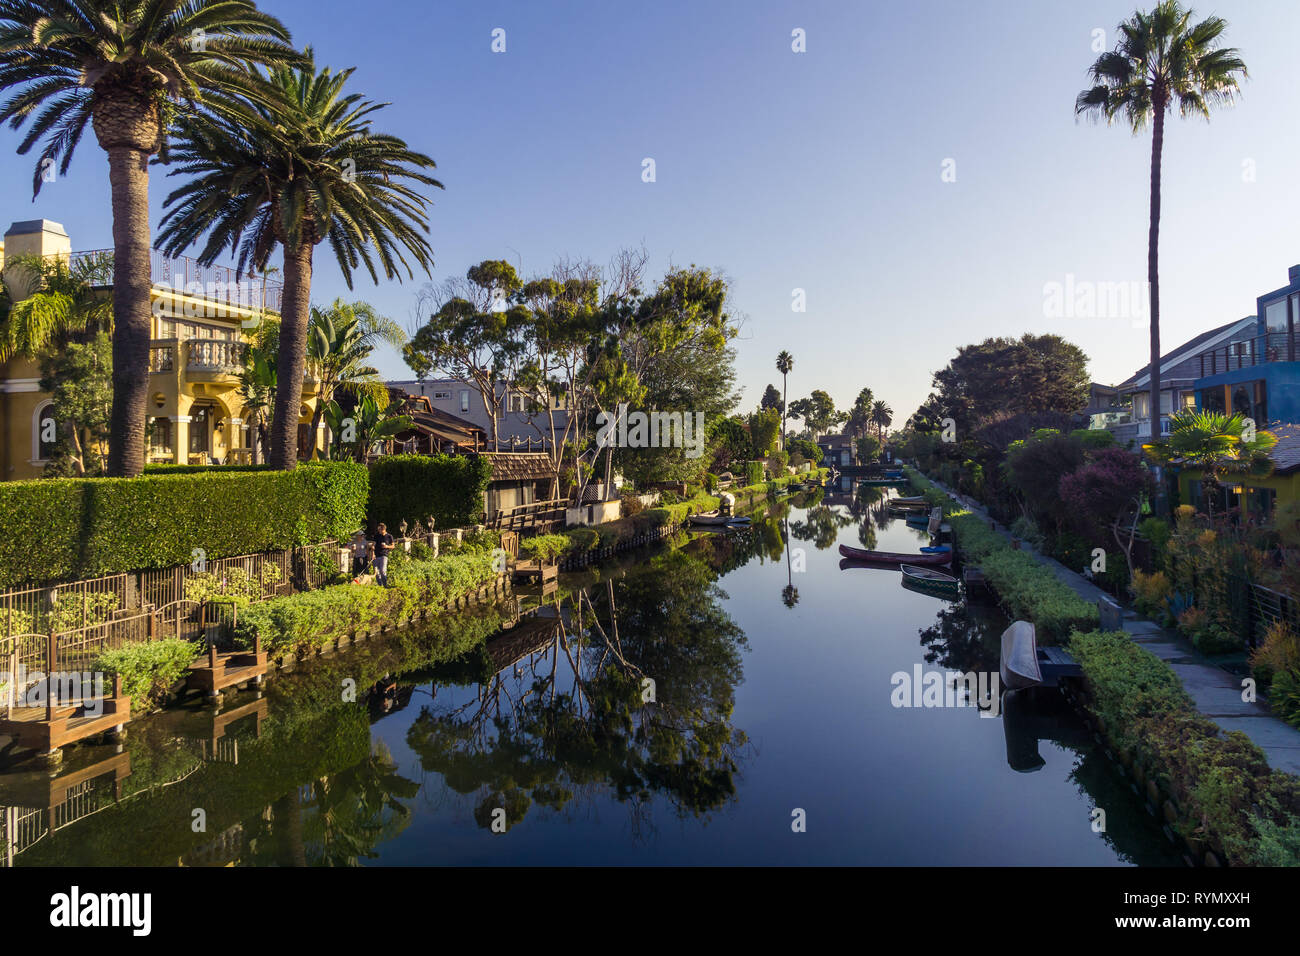 The residential part of Venice in Los Angeles - the Venice Canals Stock Photo